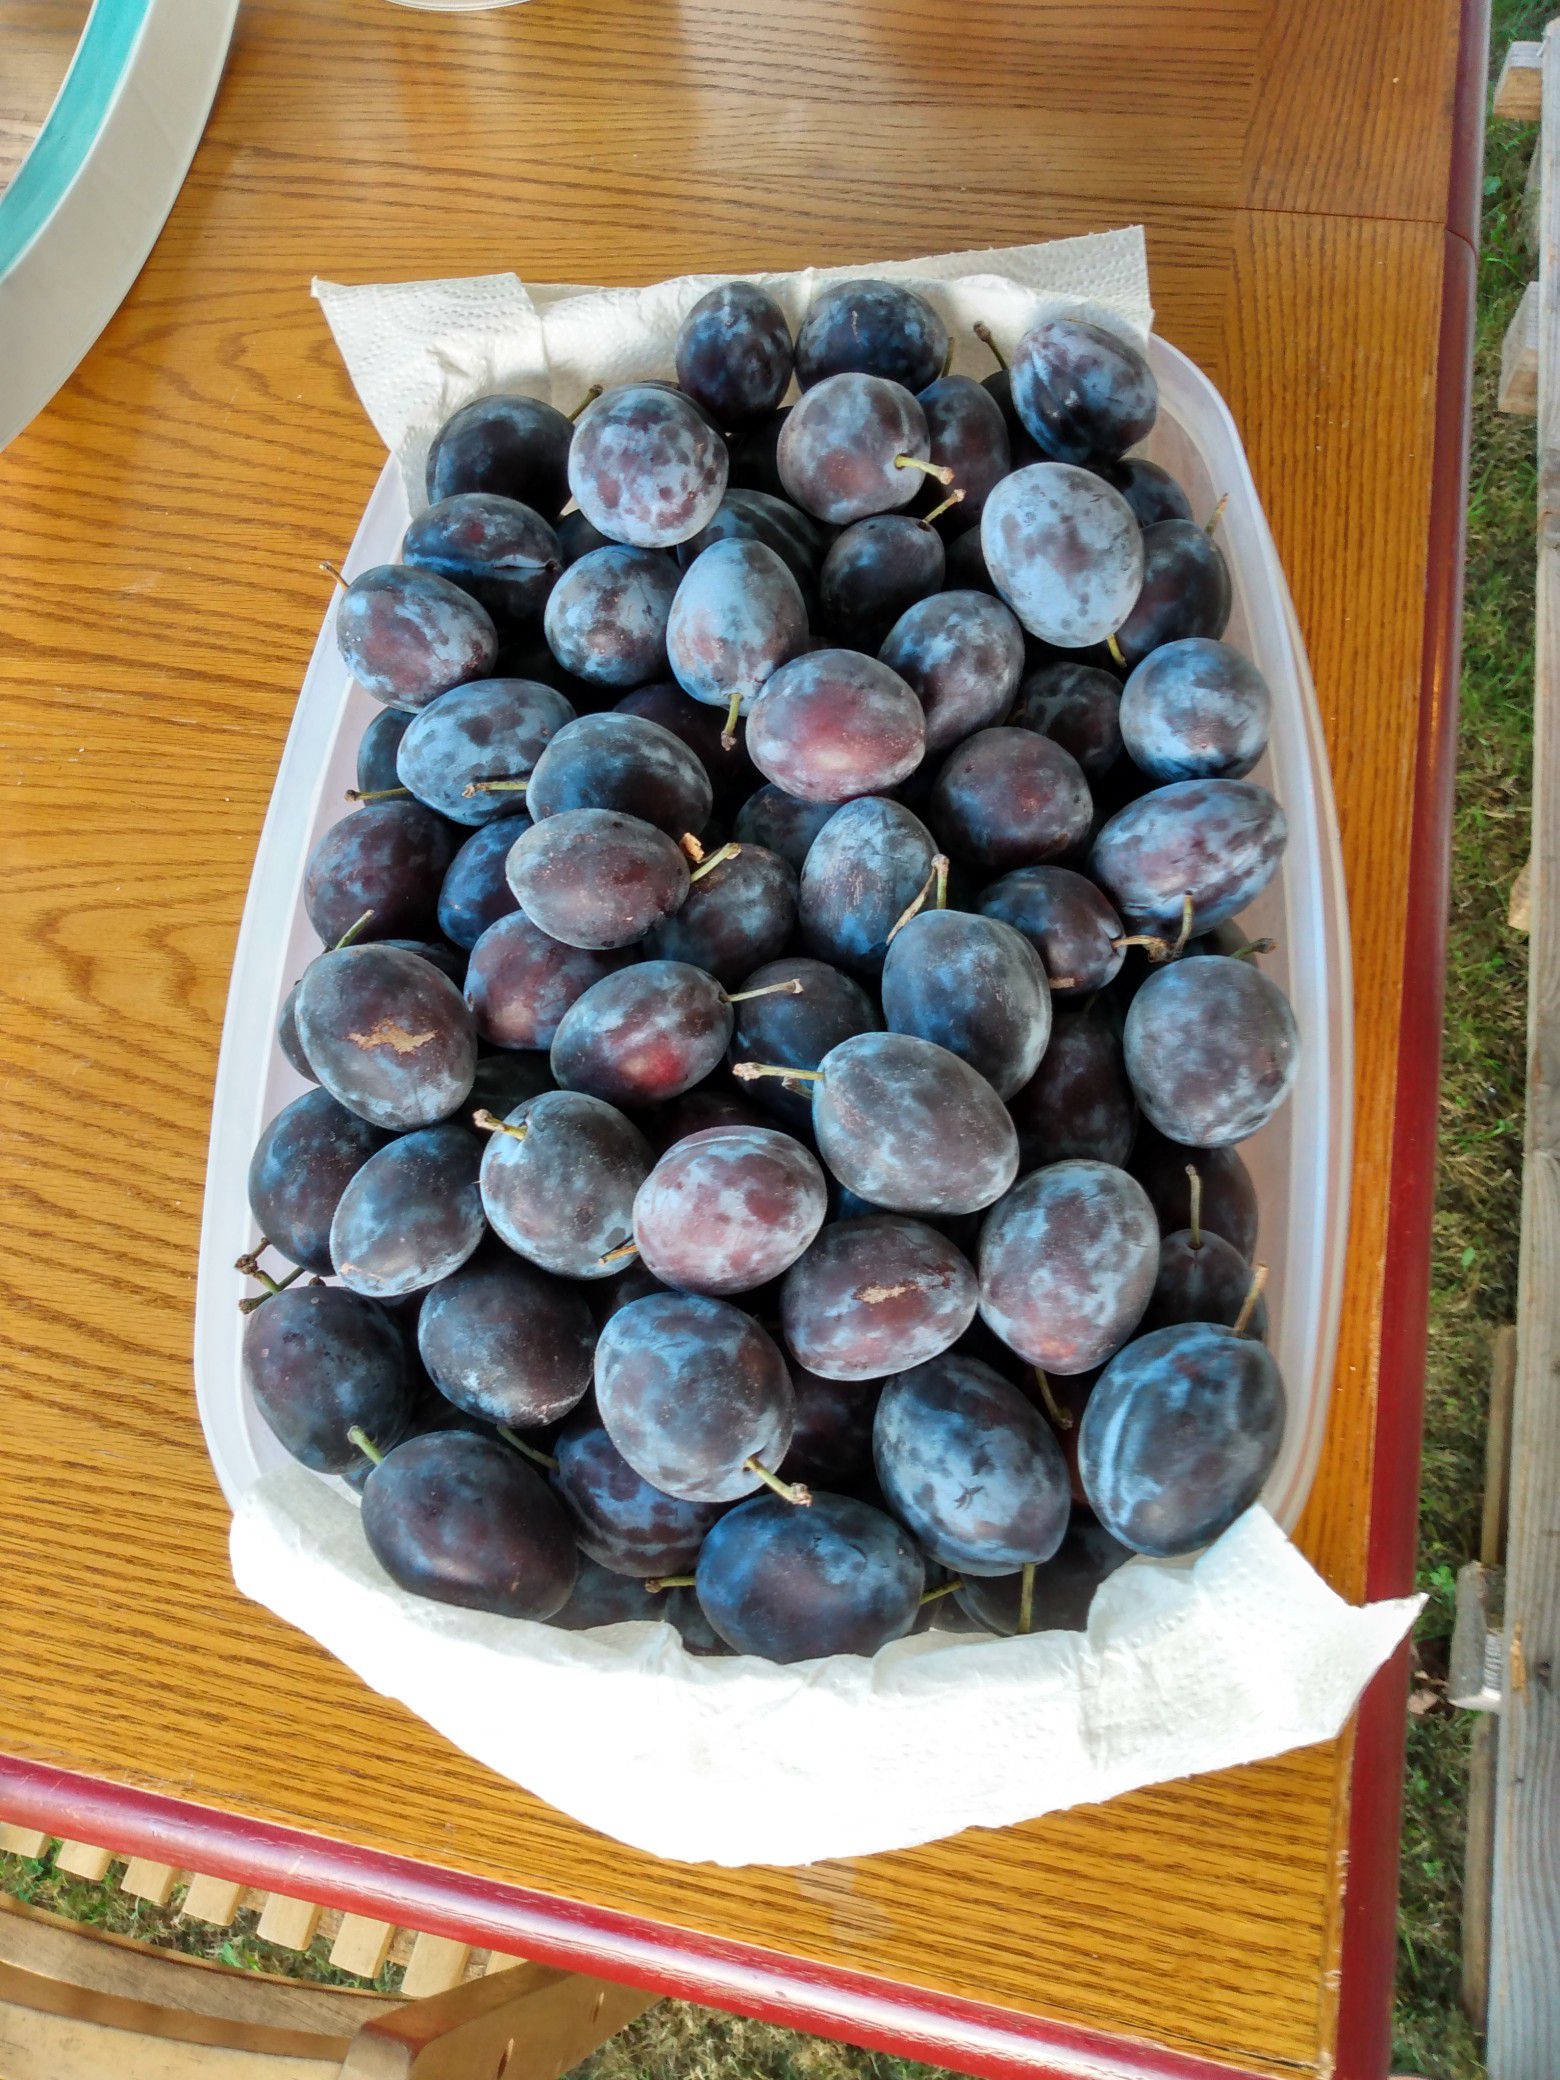 Latest Super delicious and 100% Organic Sweet Plums. $ 1.50 per pound.